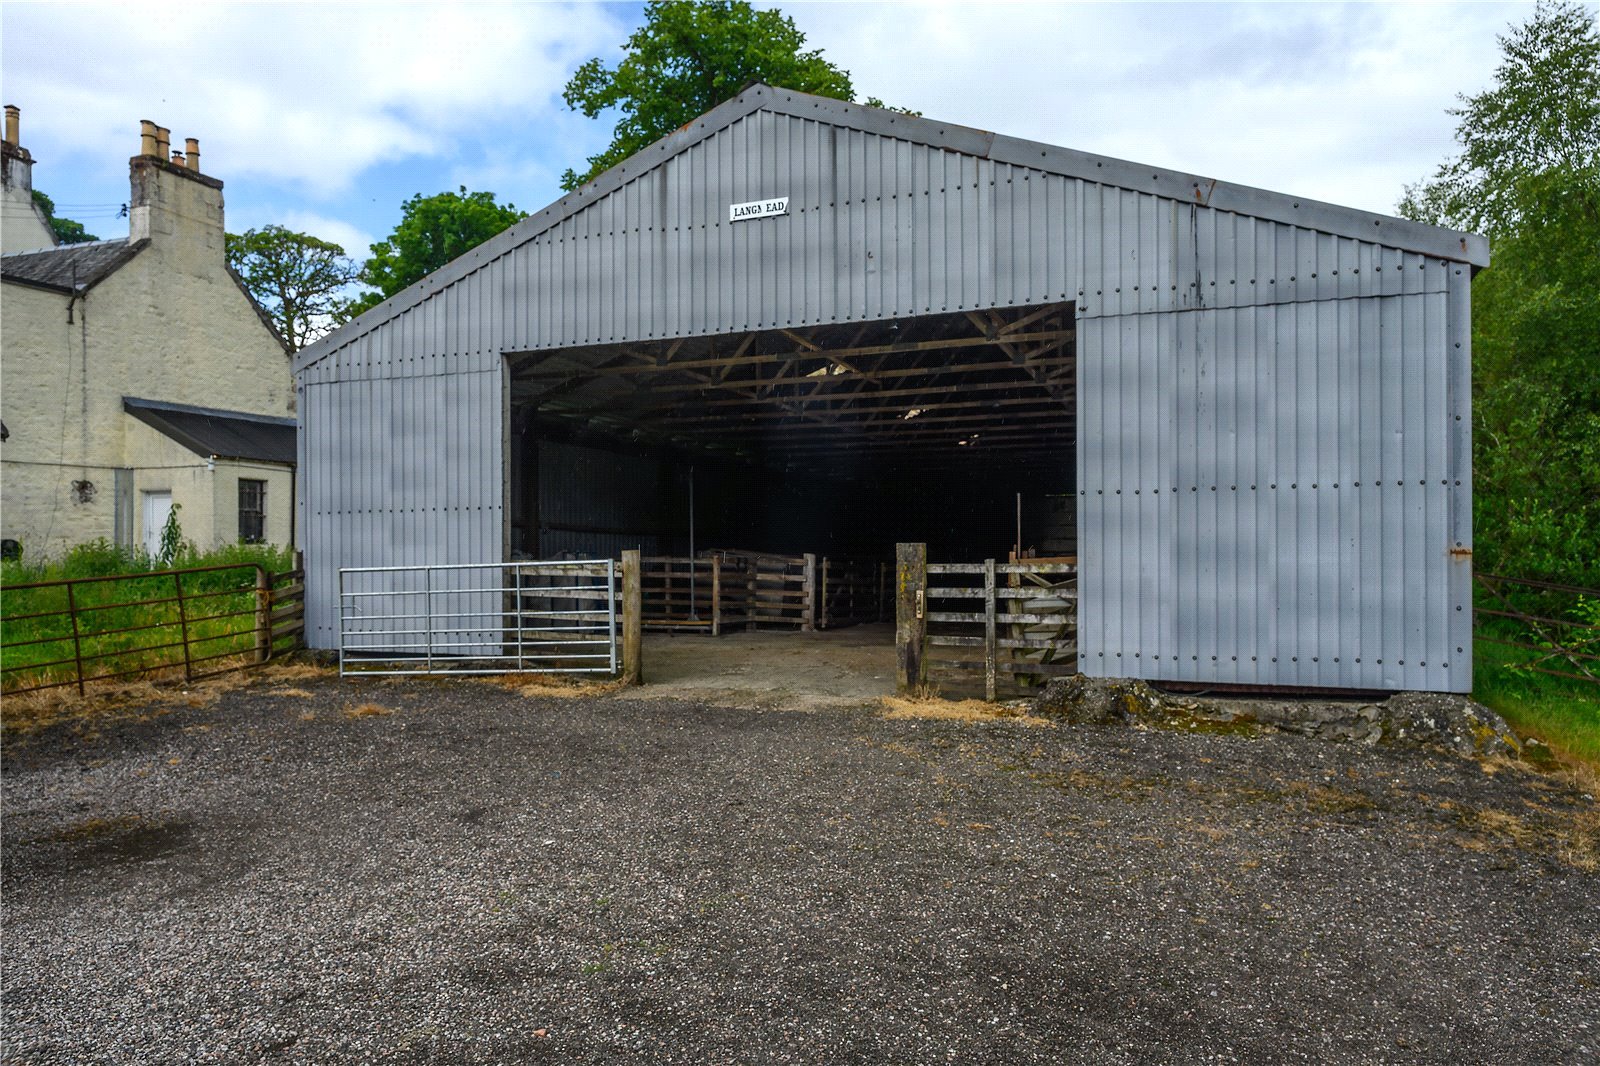 Agricultural Shed